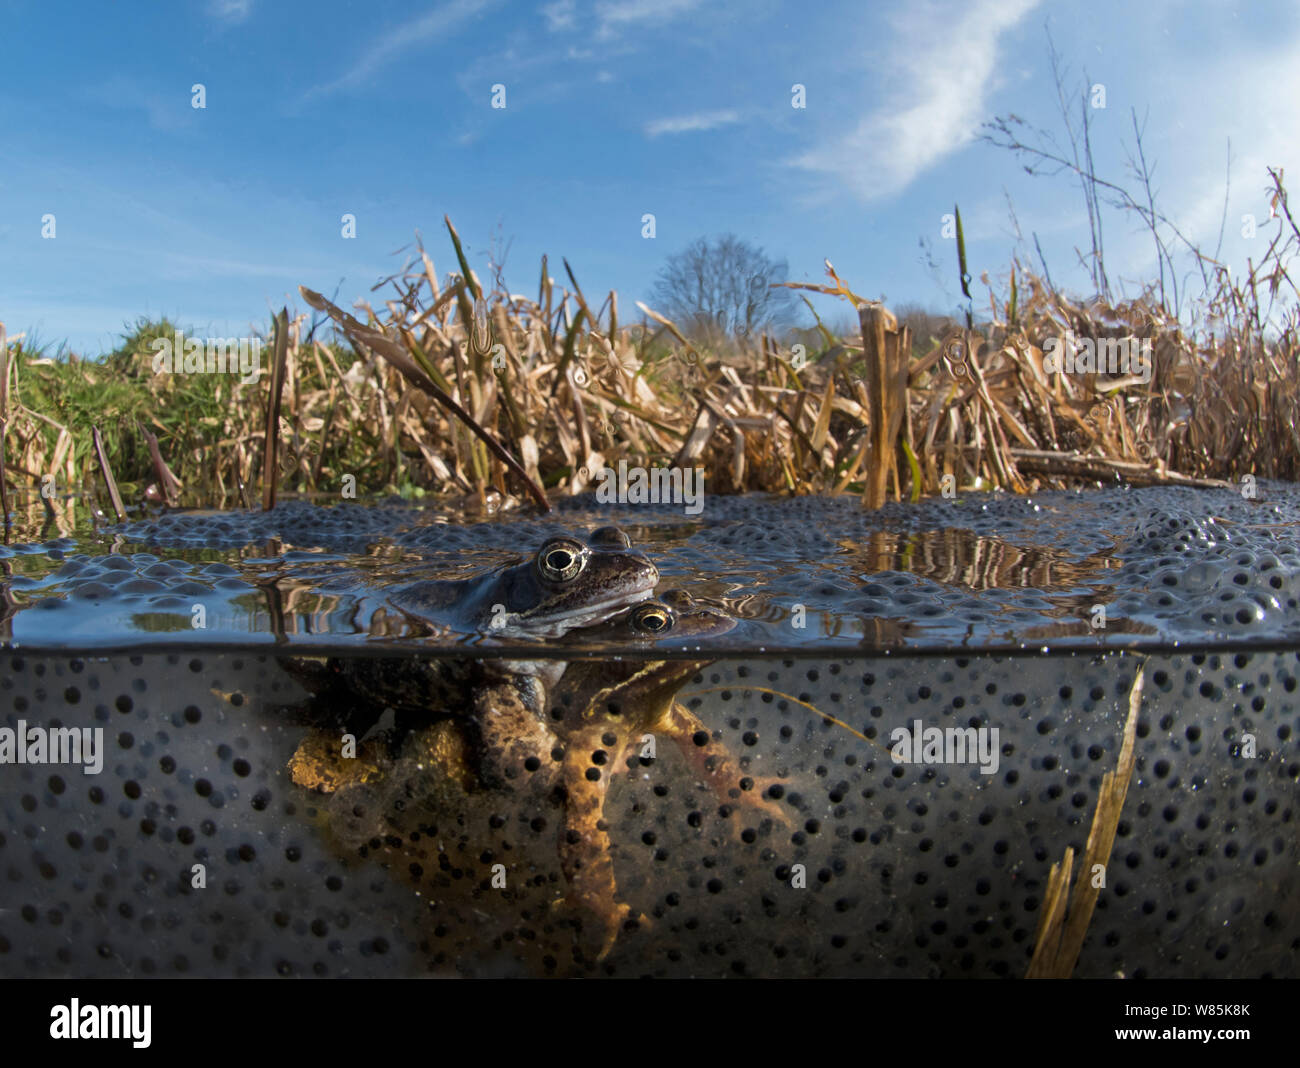 Common frogs (Rana temporaria) and spawn in pond, West Runton, North Norfolk, England, UK, March. Stock Photo